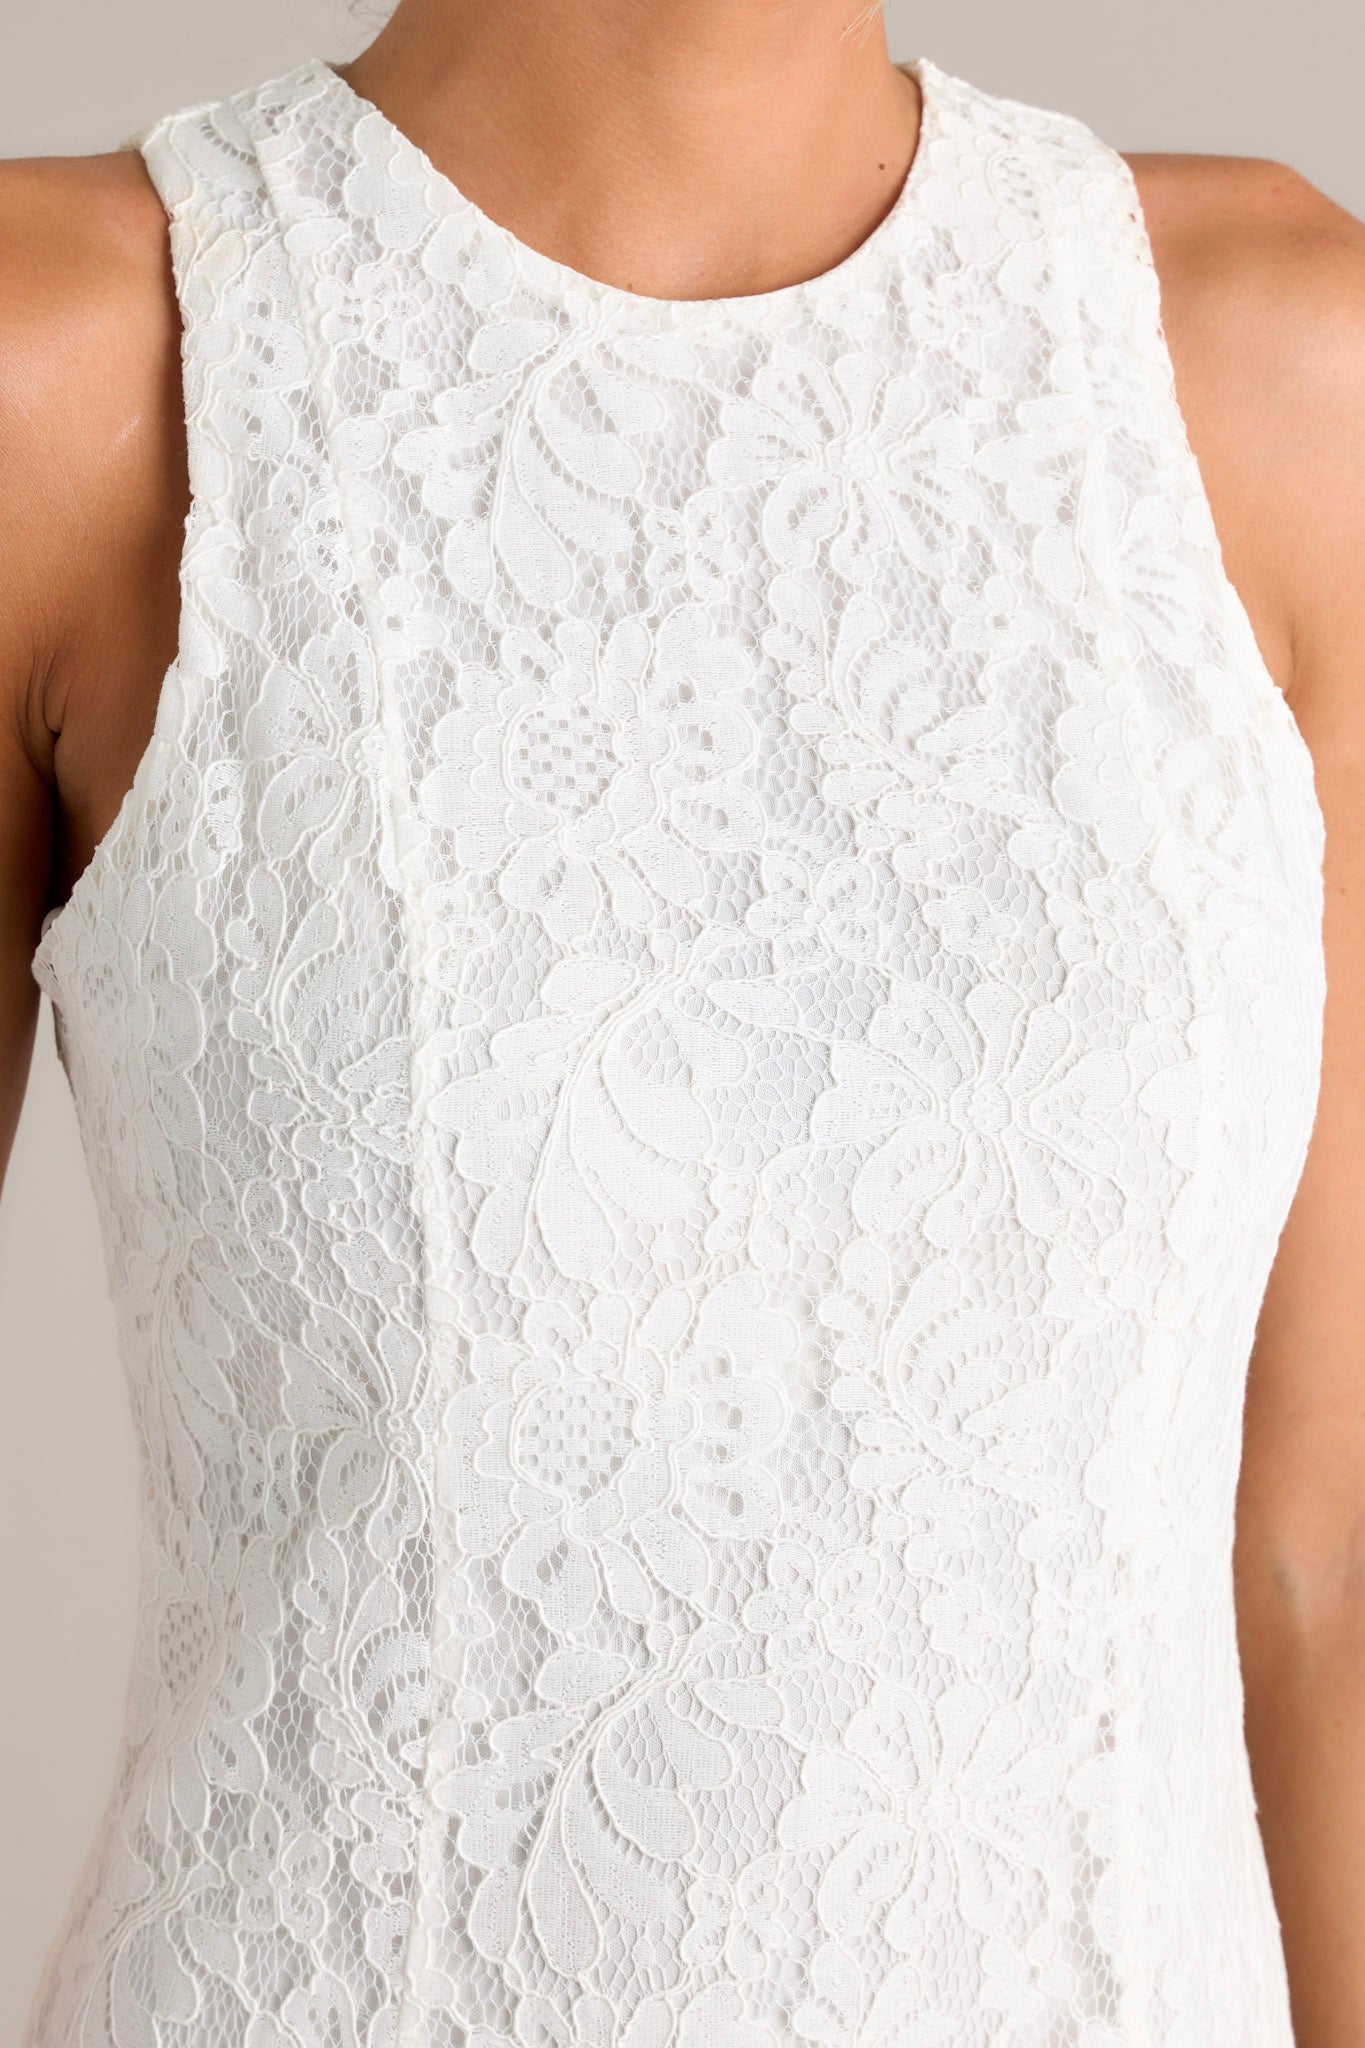 Close-up of the dress showing the high round neckline and lace overlay.